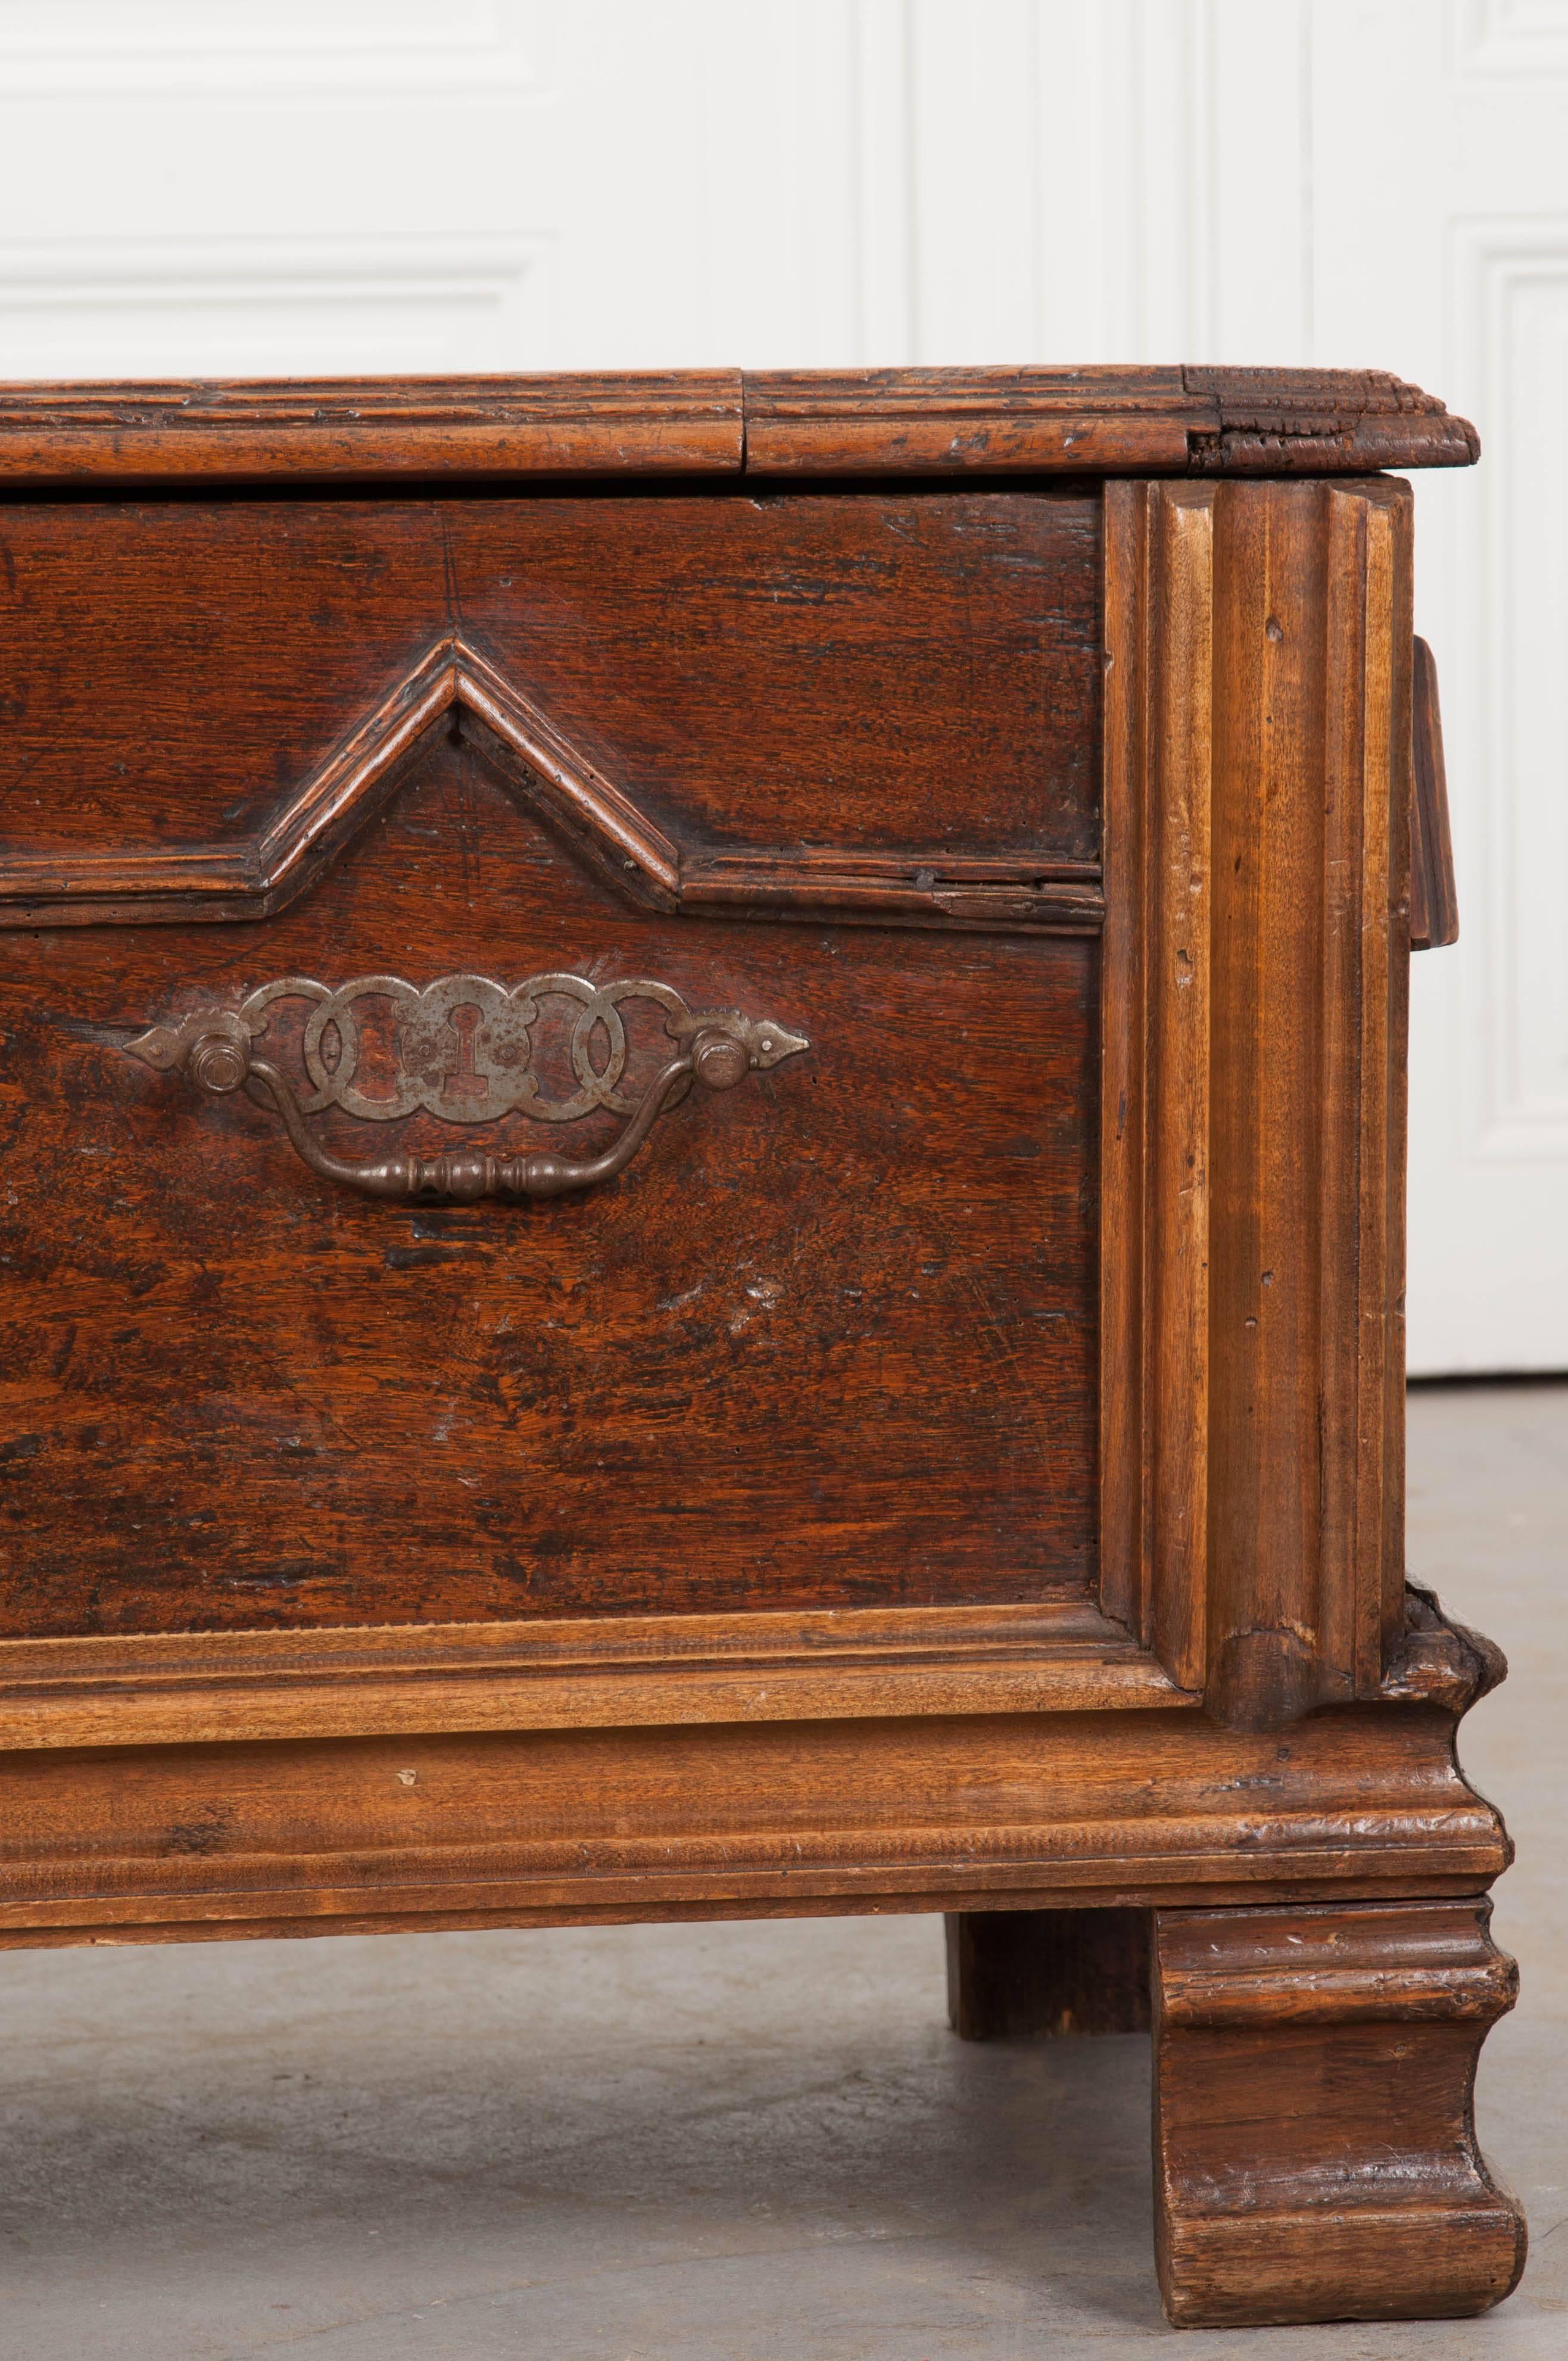 A stunning oak coffer from the early part of the 19th century, France. This wonderful trunk has a design reminiscent of Jacobean design, however is more recent. Beautiful moulded walnut trim frames the front and sides with other trim fashioned into